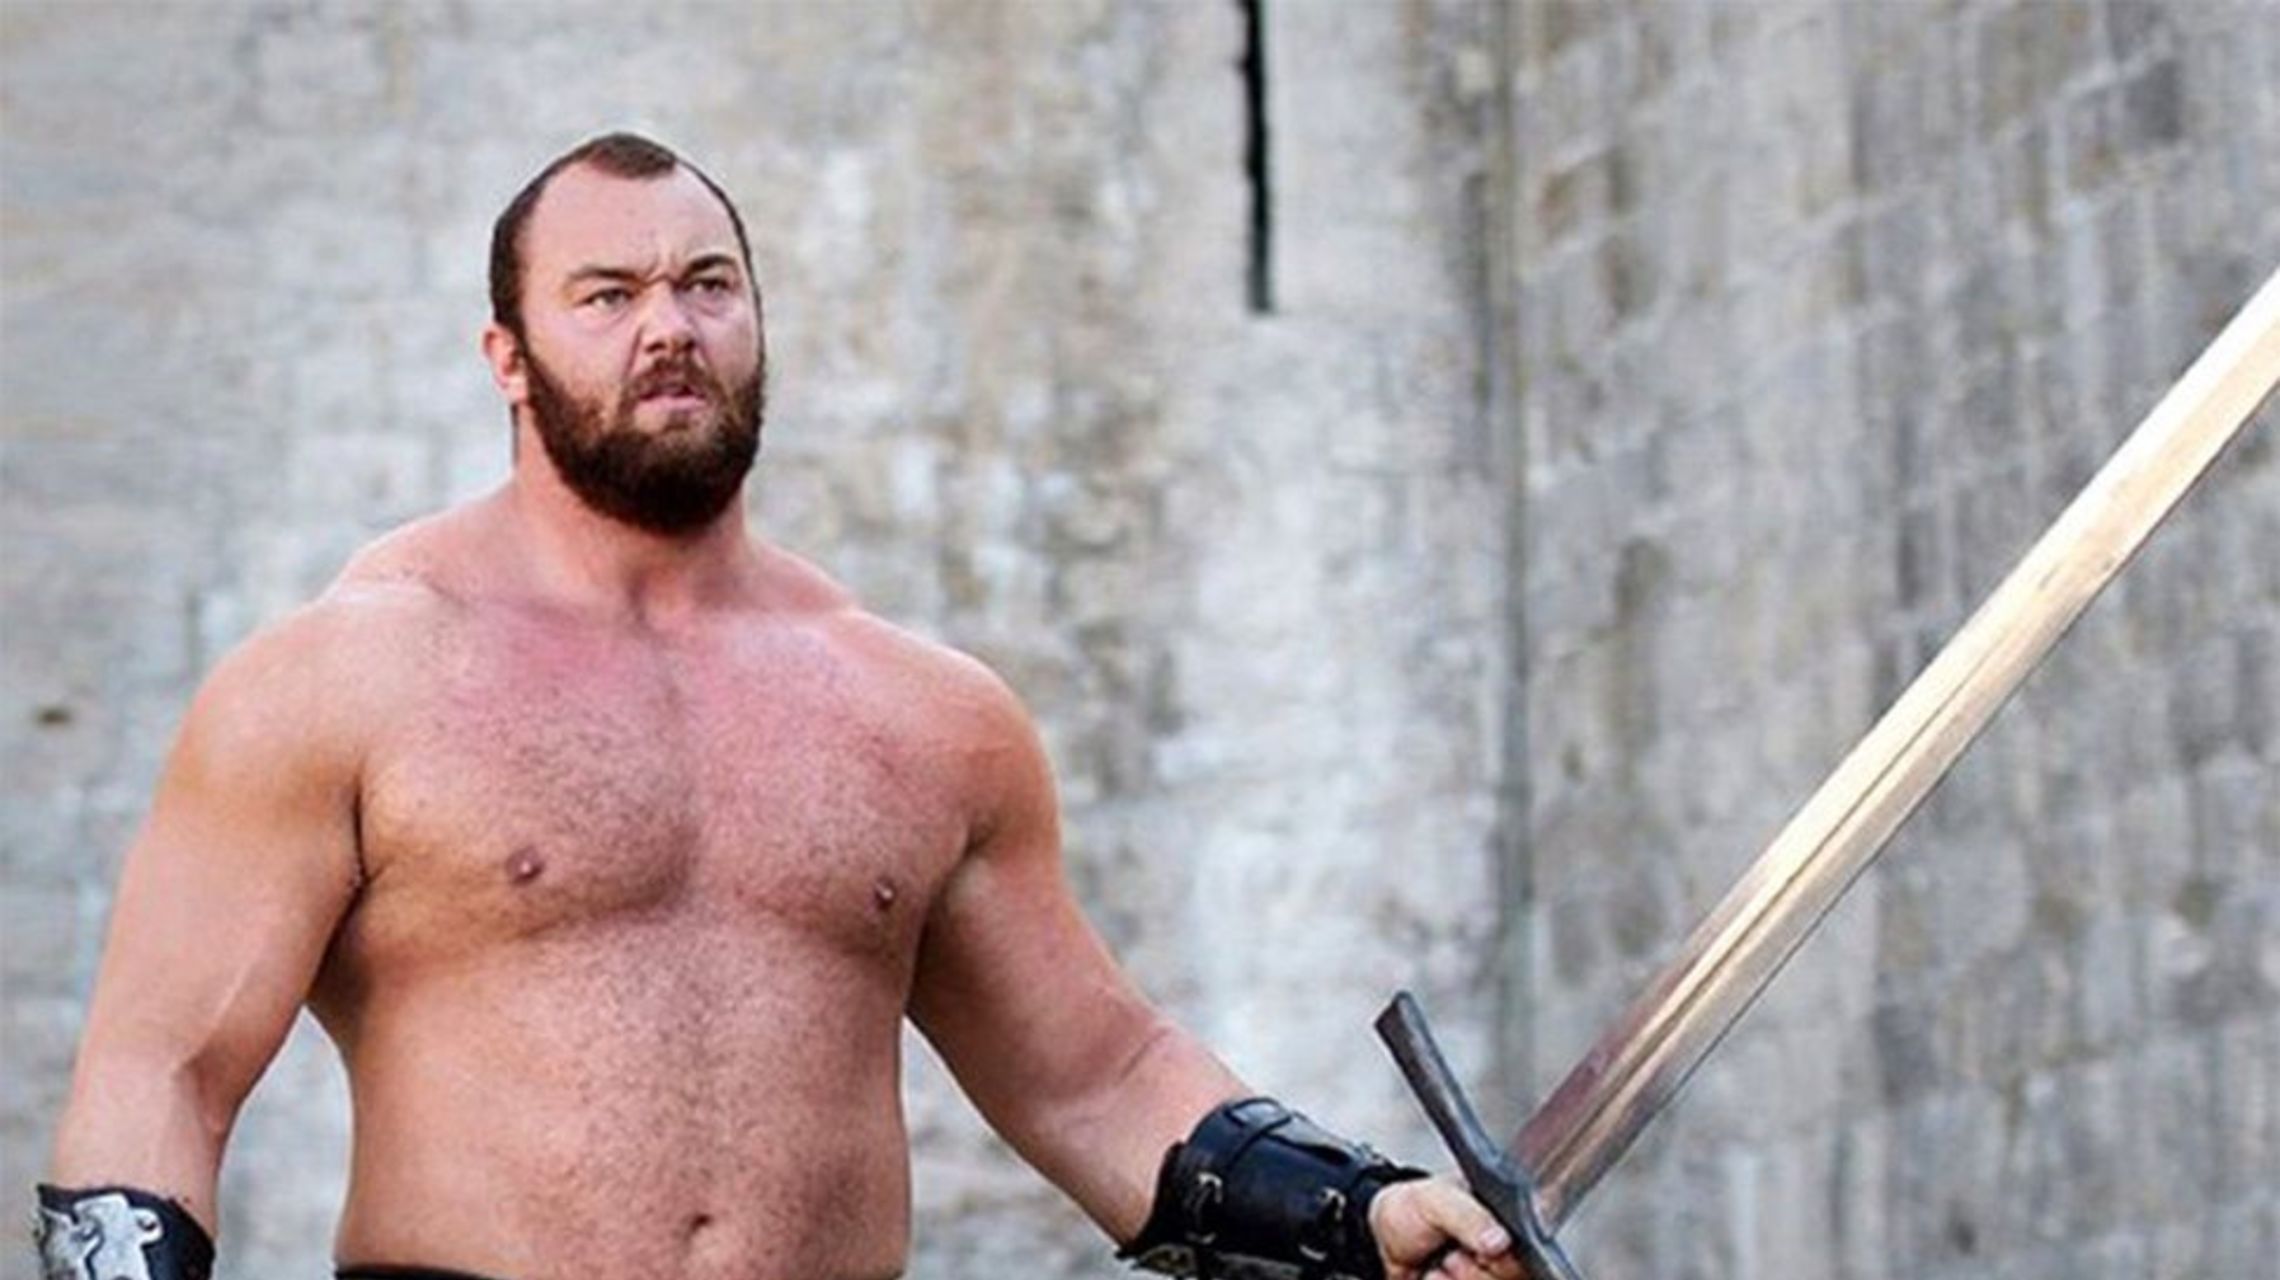 the mountain game of thrones